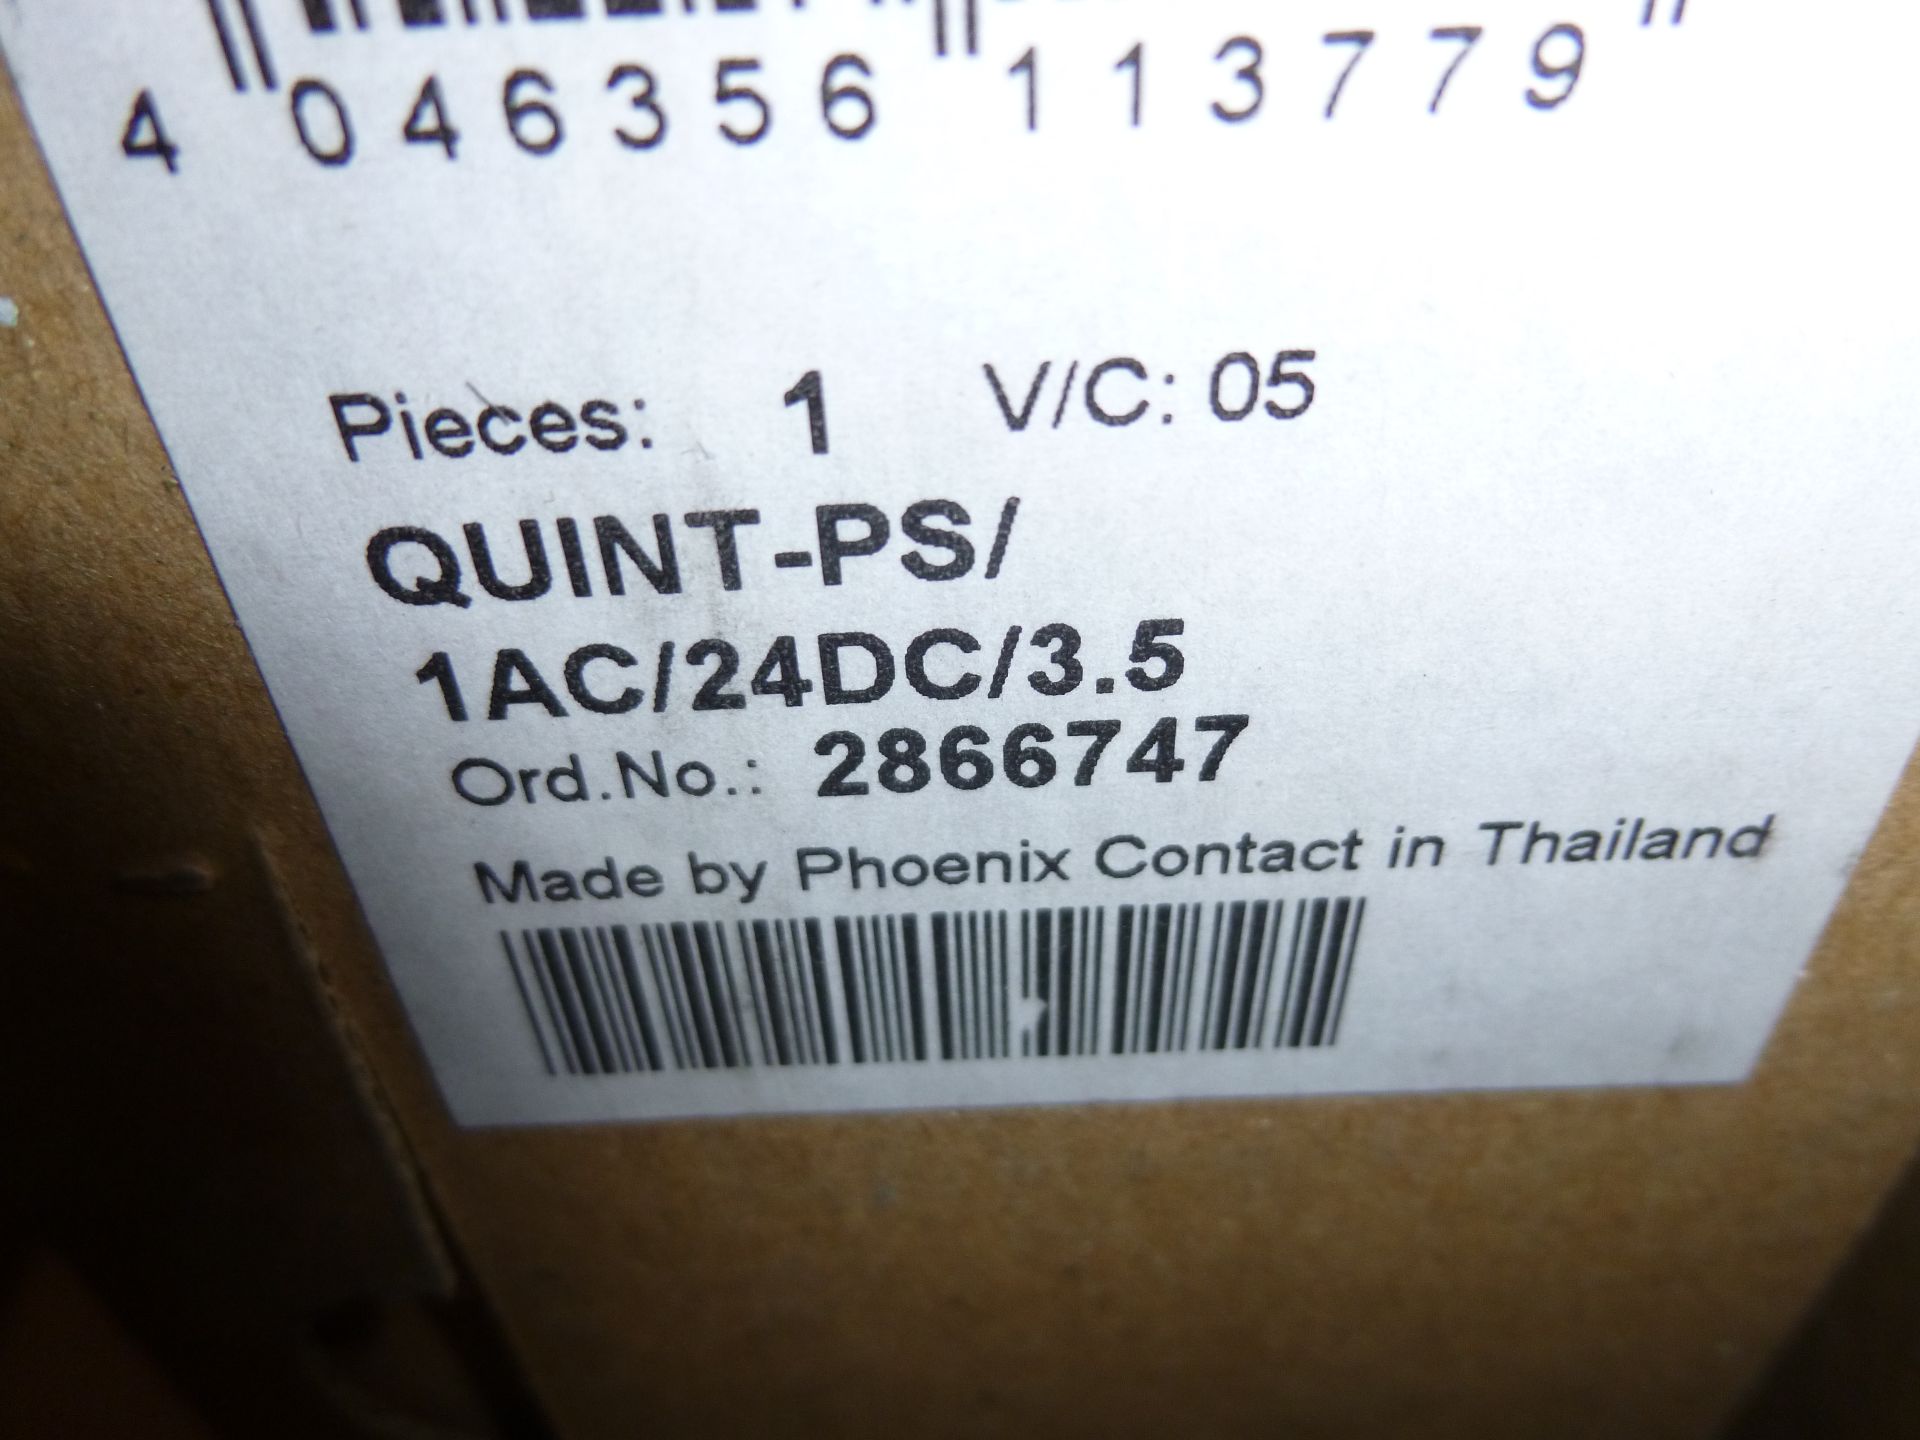 Qty 2 Phoenix Contact Power Supplies Model 1AC/24DC/3.5 new in boxes, as always with Brolyn LLC - Image 2 of 2